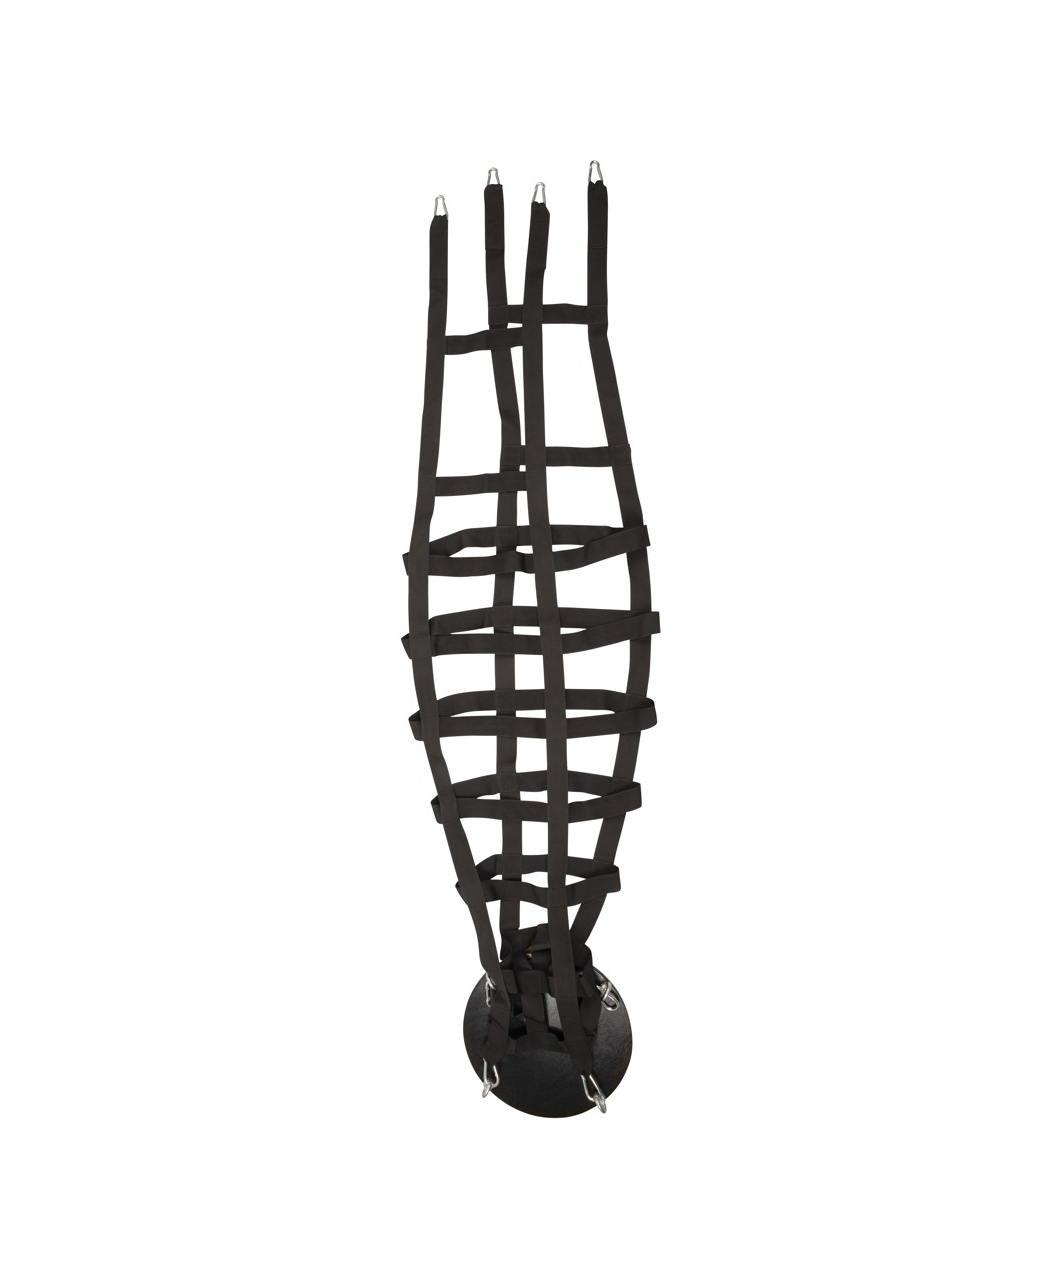 Bad Kitty hanging strap cage